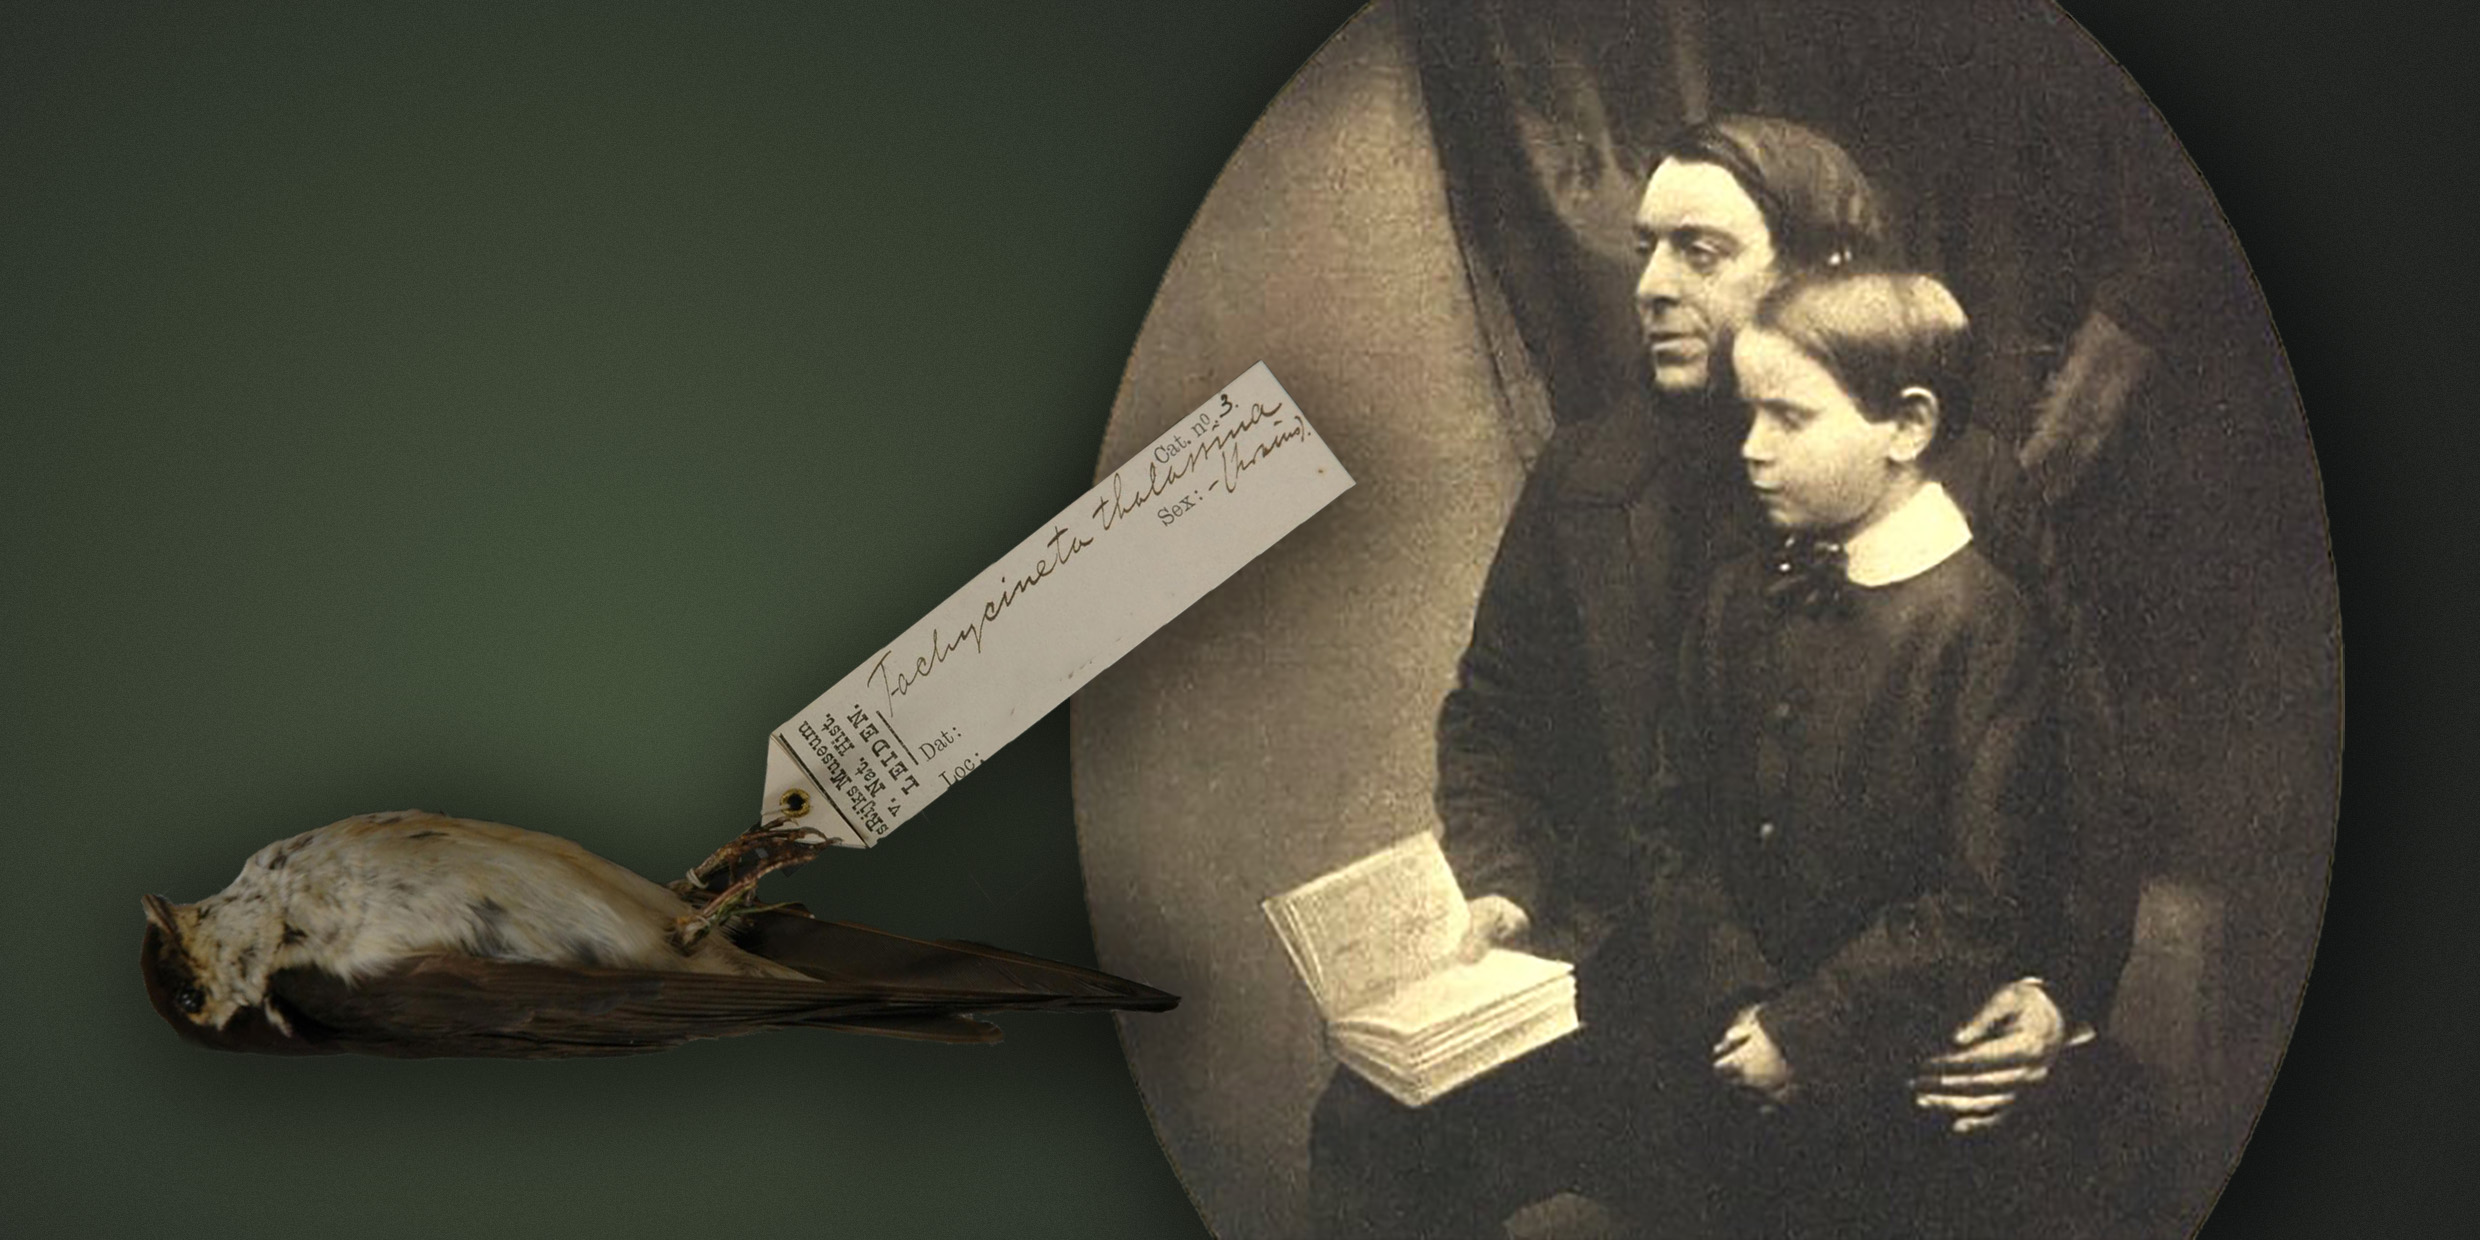 Image montage of a dead swallow specimen and a portrait of a father and son seated together